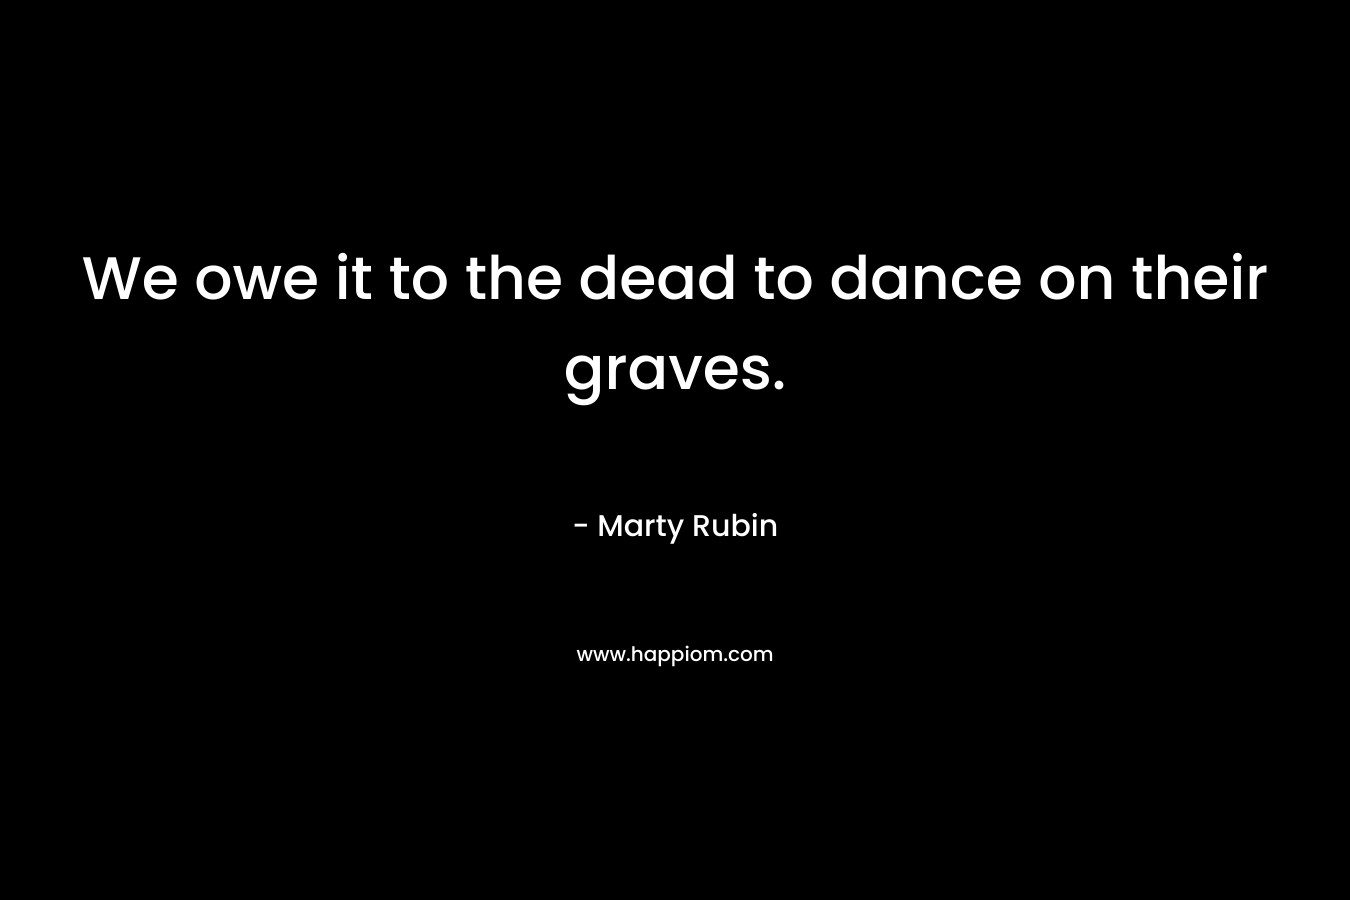 We owe it to the dead to dance on their graves. – Marty Rubin